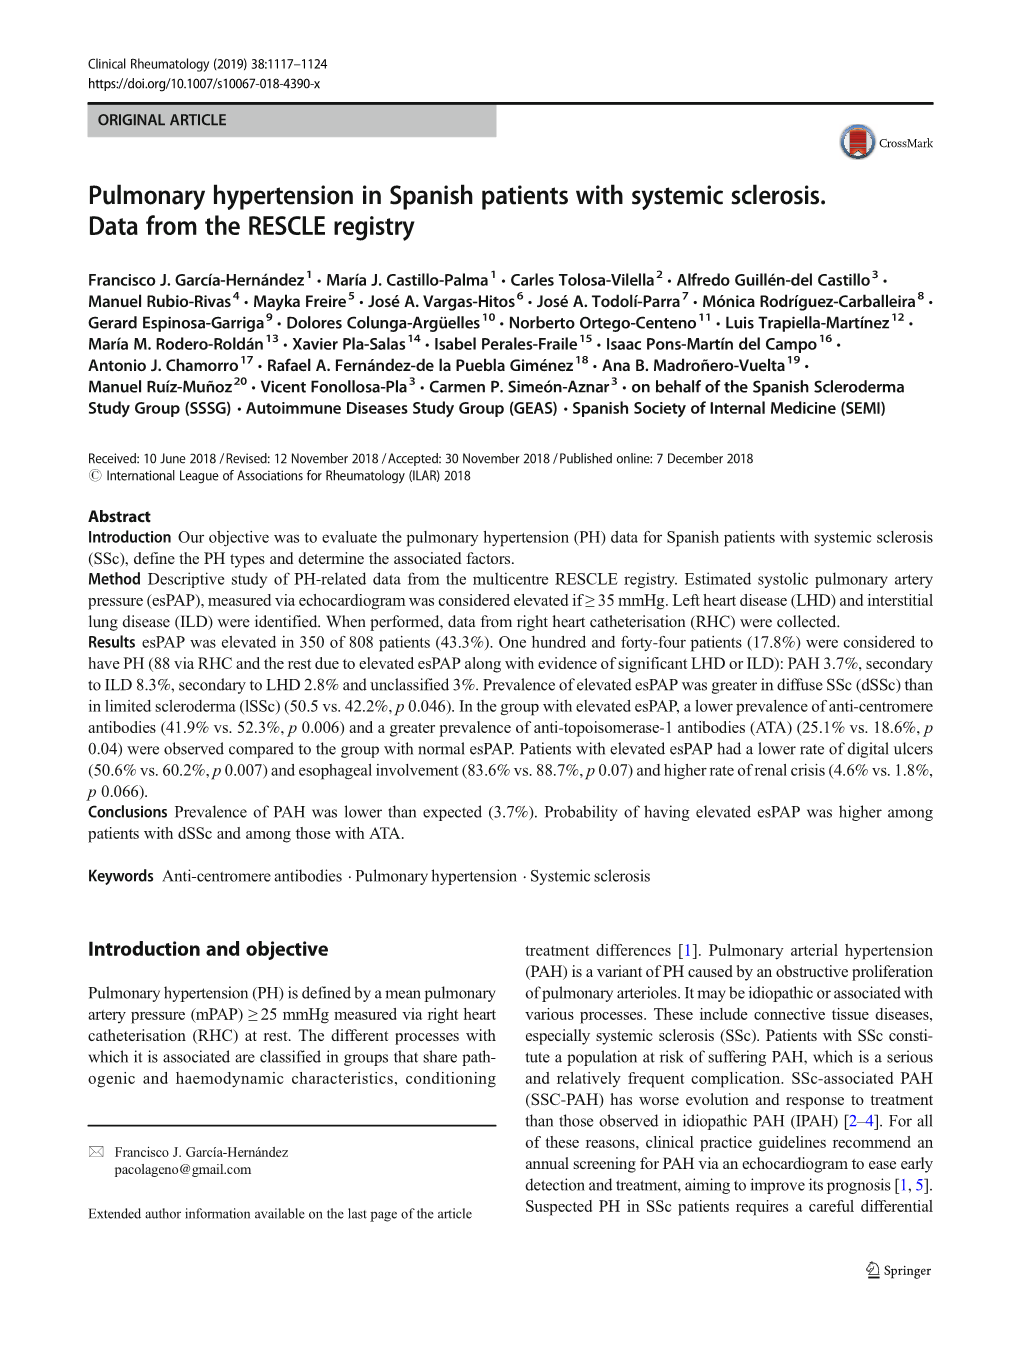 Pulmonary Hypertension in Spanish Patients with Systemic Sclerosis